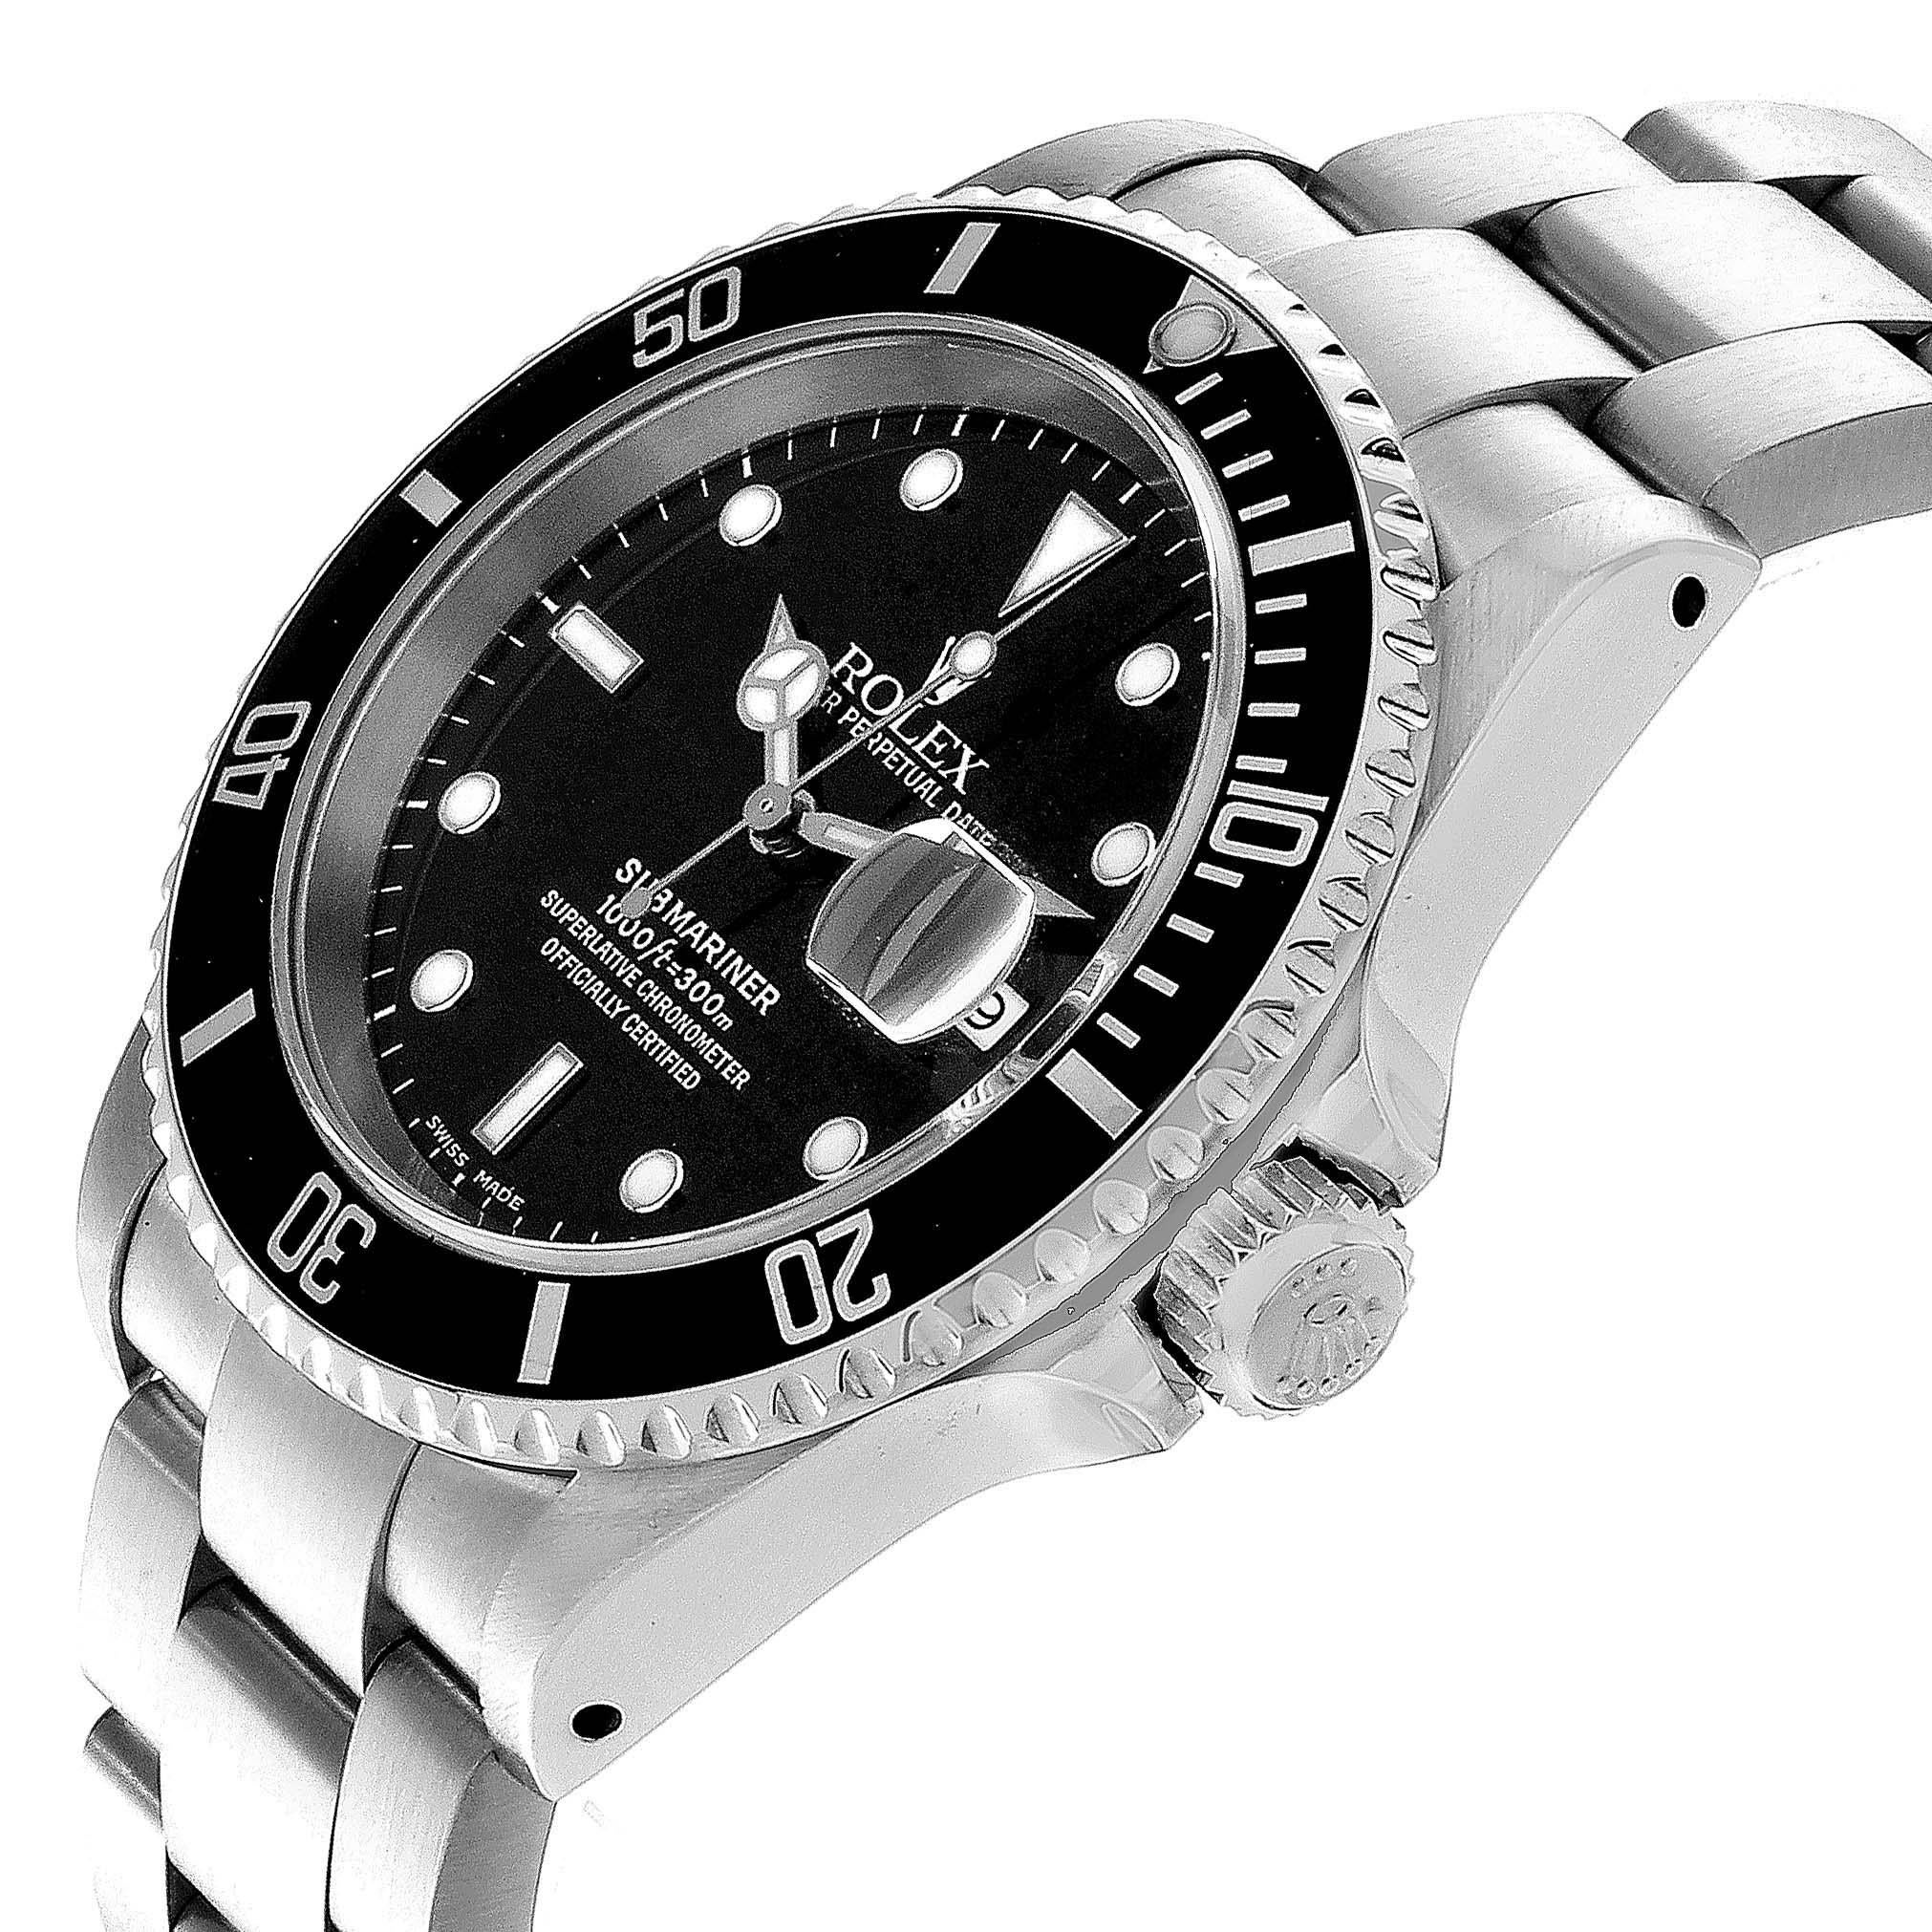 Rolex Submariner Date Stainless Steel Men’s Watch 16610 For Sale 1